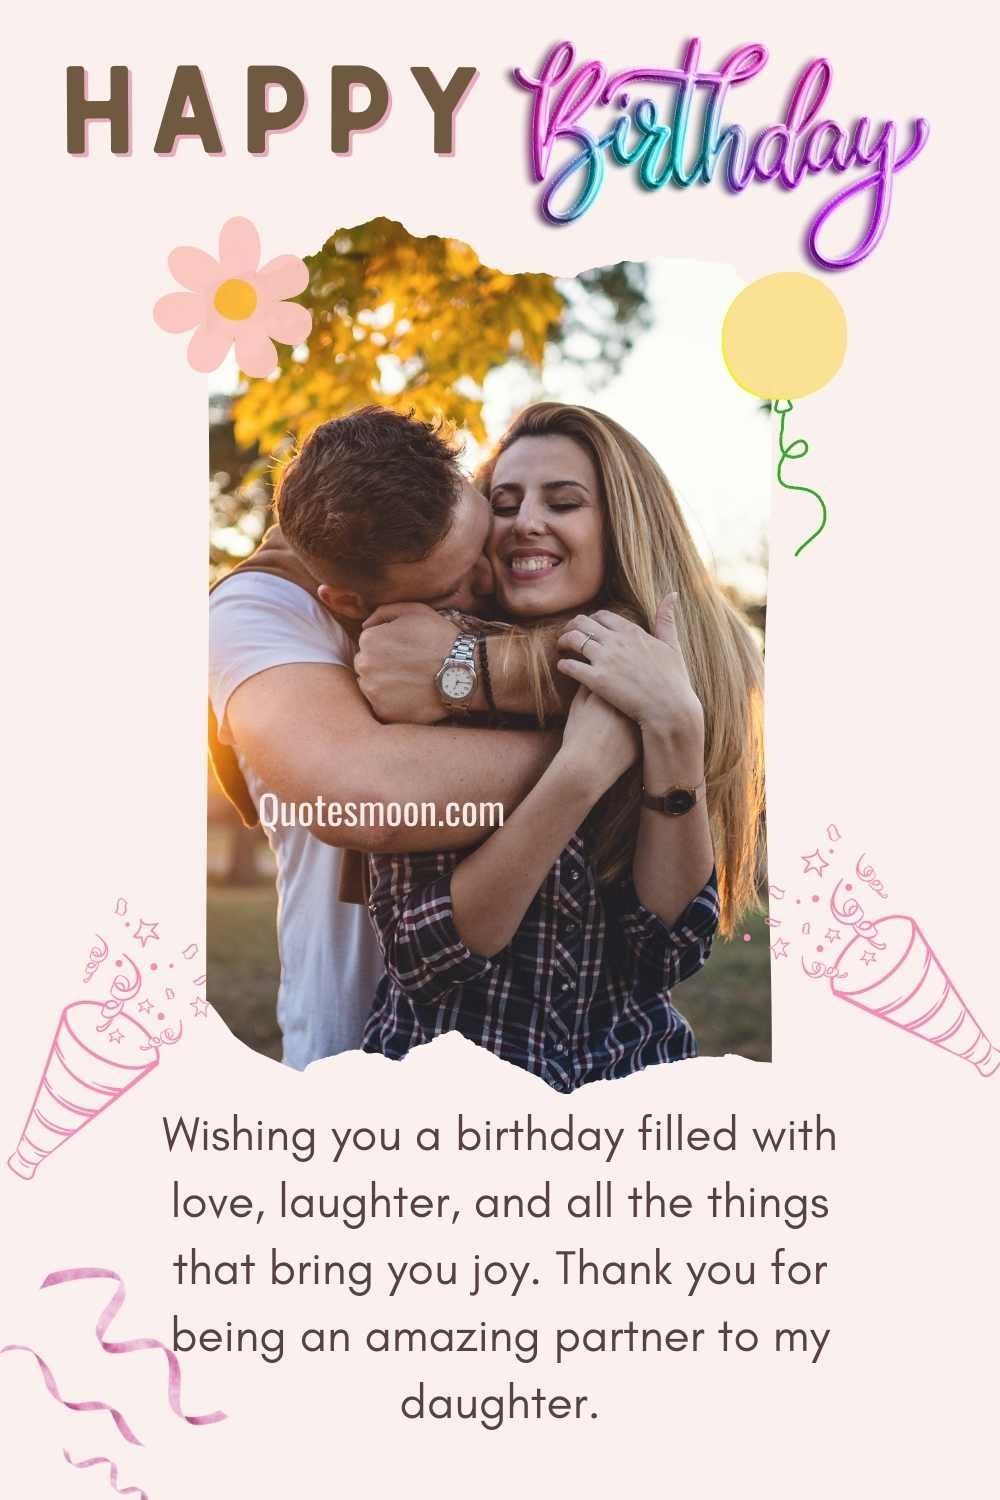 birthday letter to the boy dating my daughter with images